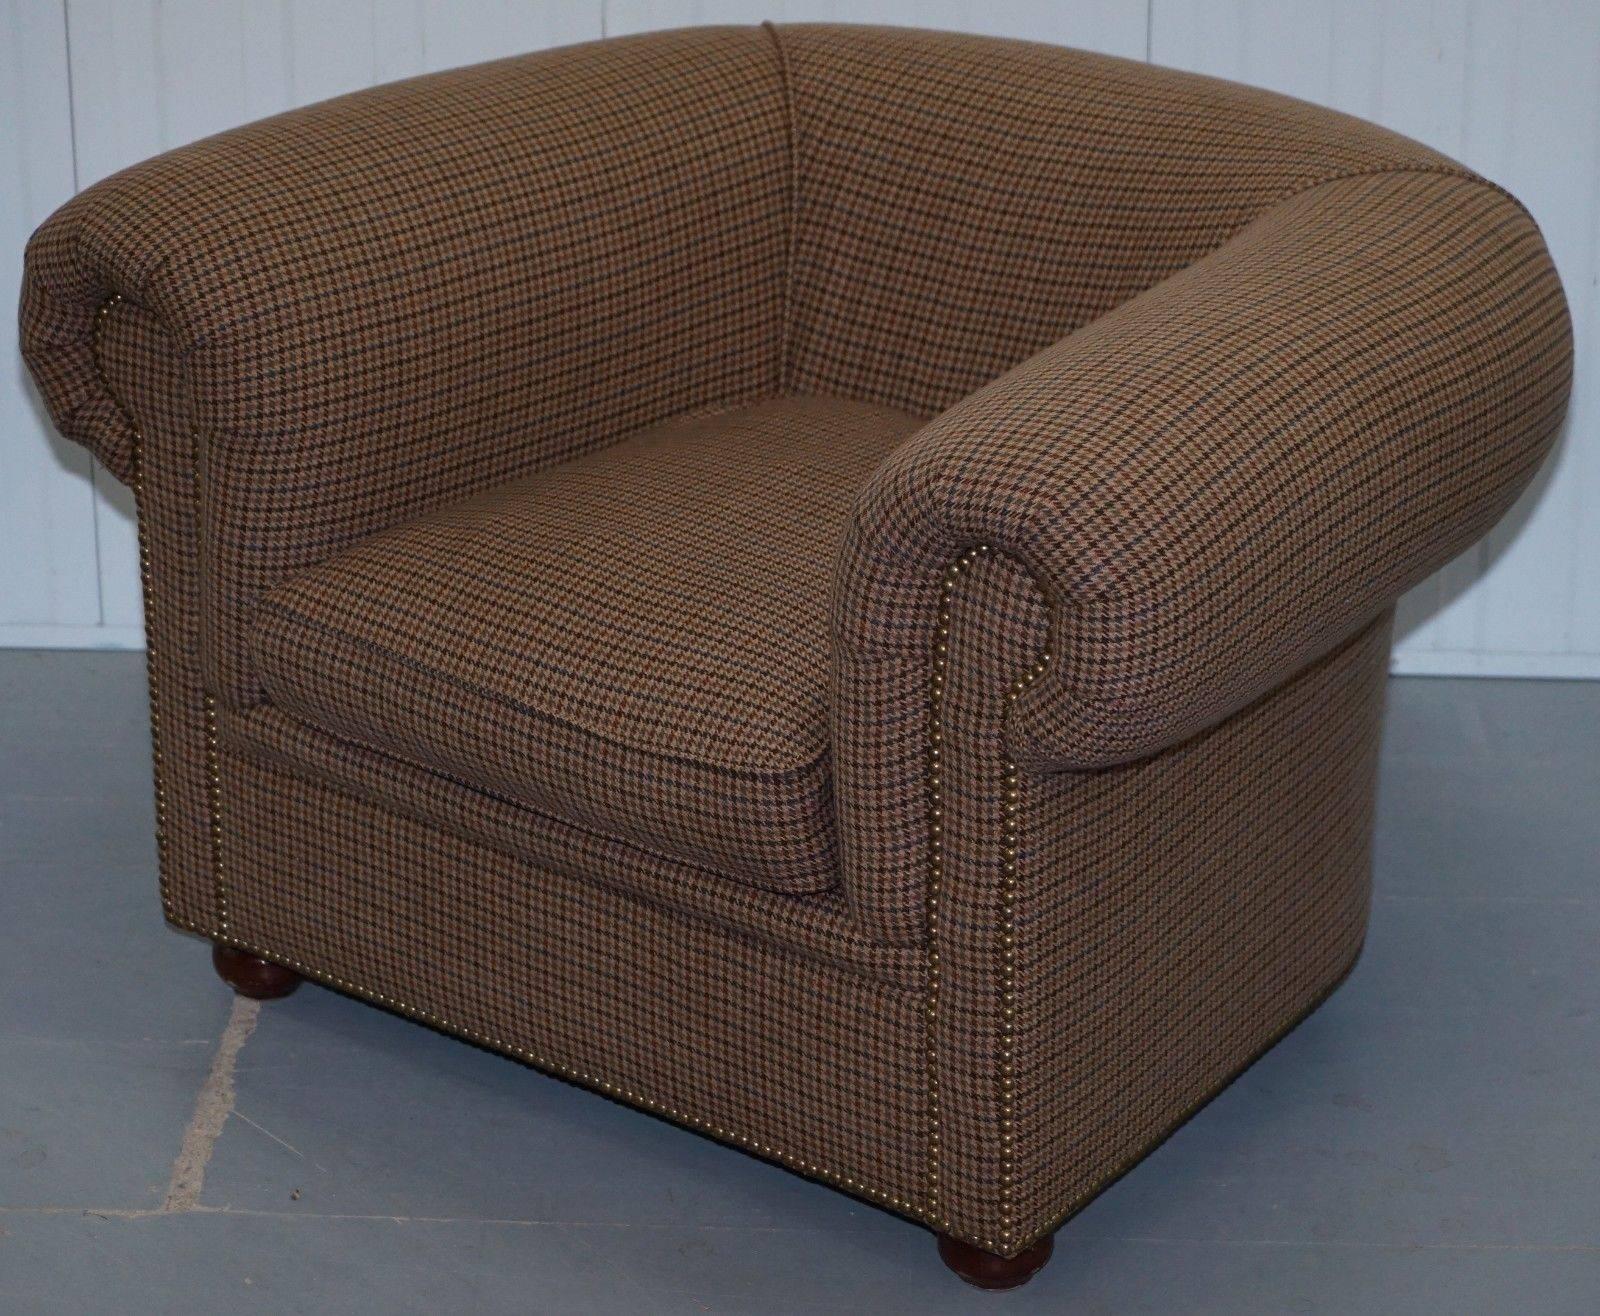 We are delighted to offer for sale this perfect condition Herringbone wool upholstered Ralph Lauren club armchair

A lovely looking and well made armchair in retail new perfect condition so far as I can see, there is a tiny little mark on the